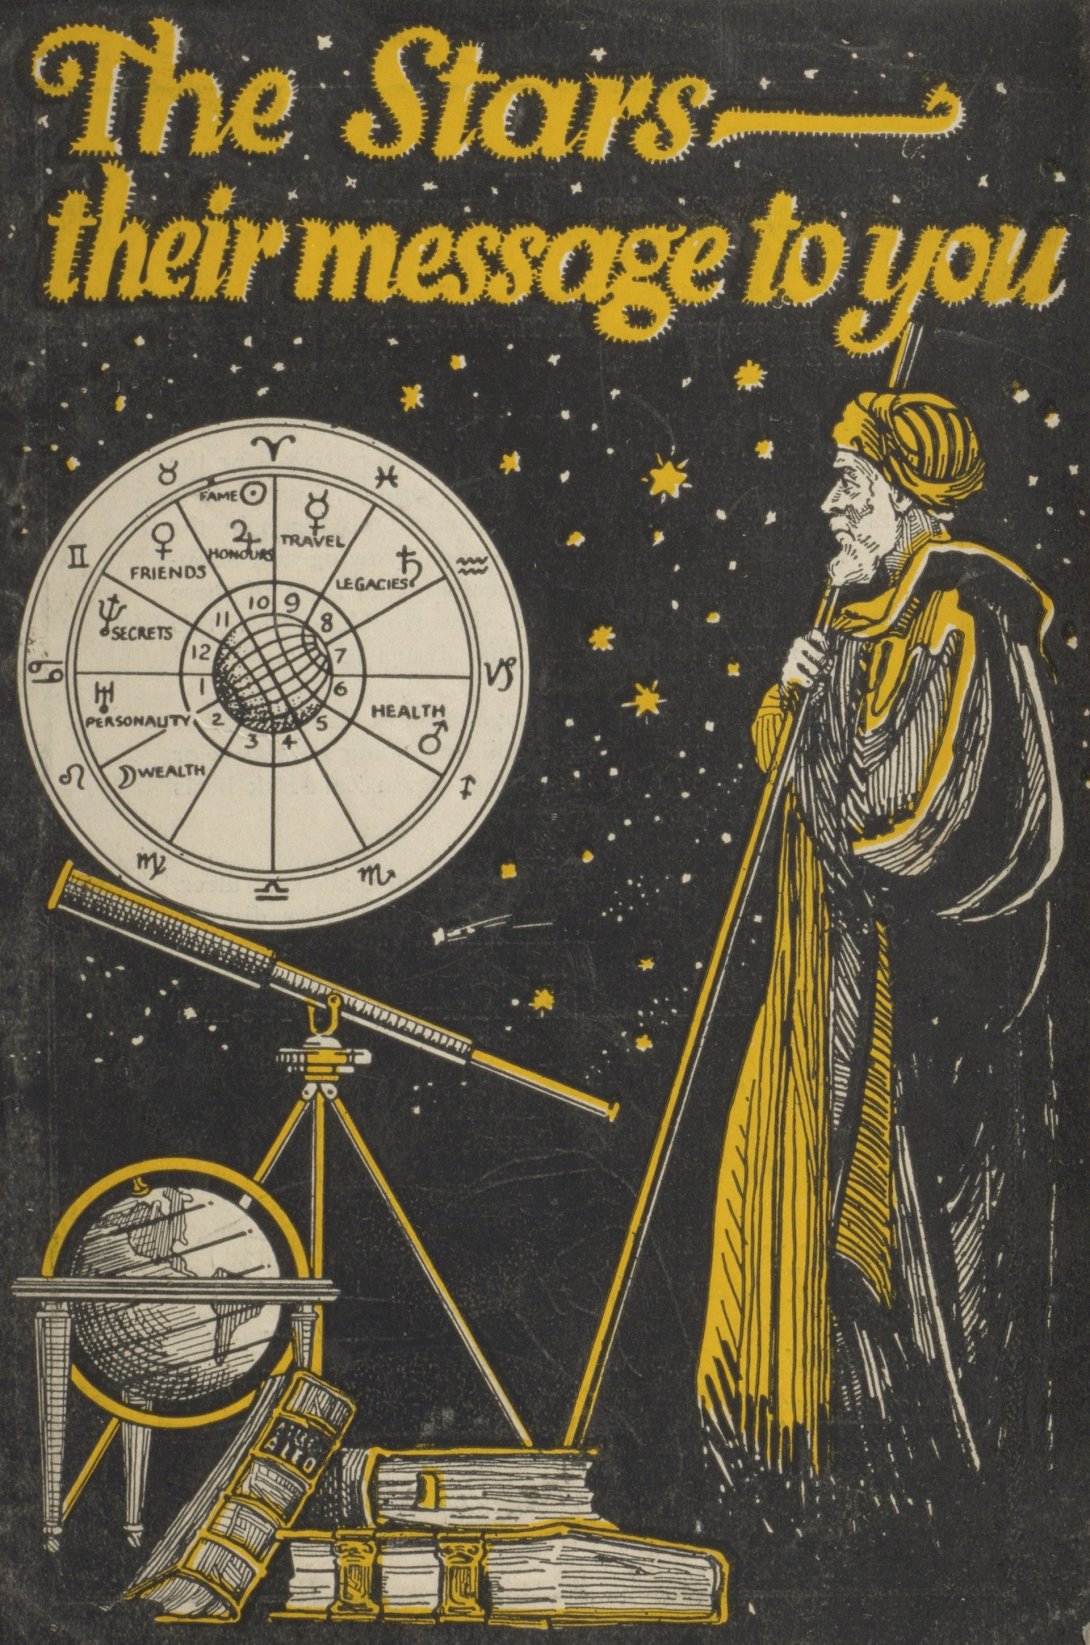 Man in long robes with large staff standing near books, a globe and a telescope looking at the stars. Yellow text at the top reads 'The Stars - their message to you'